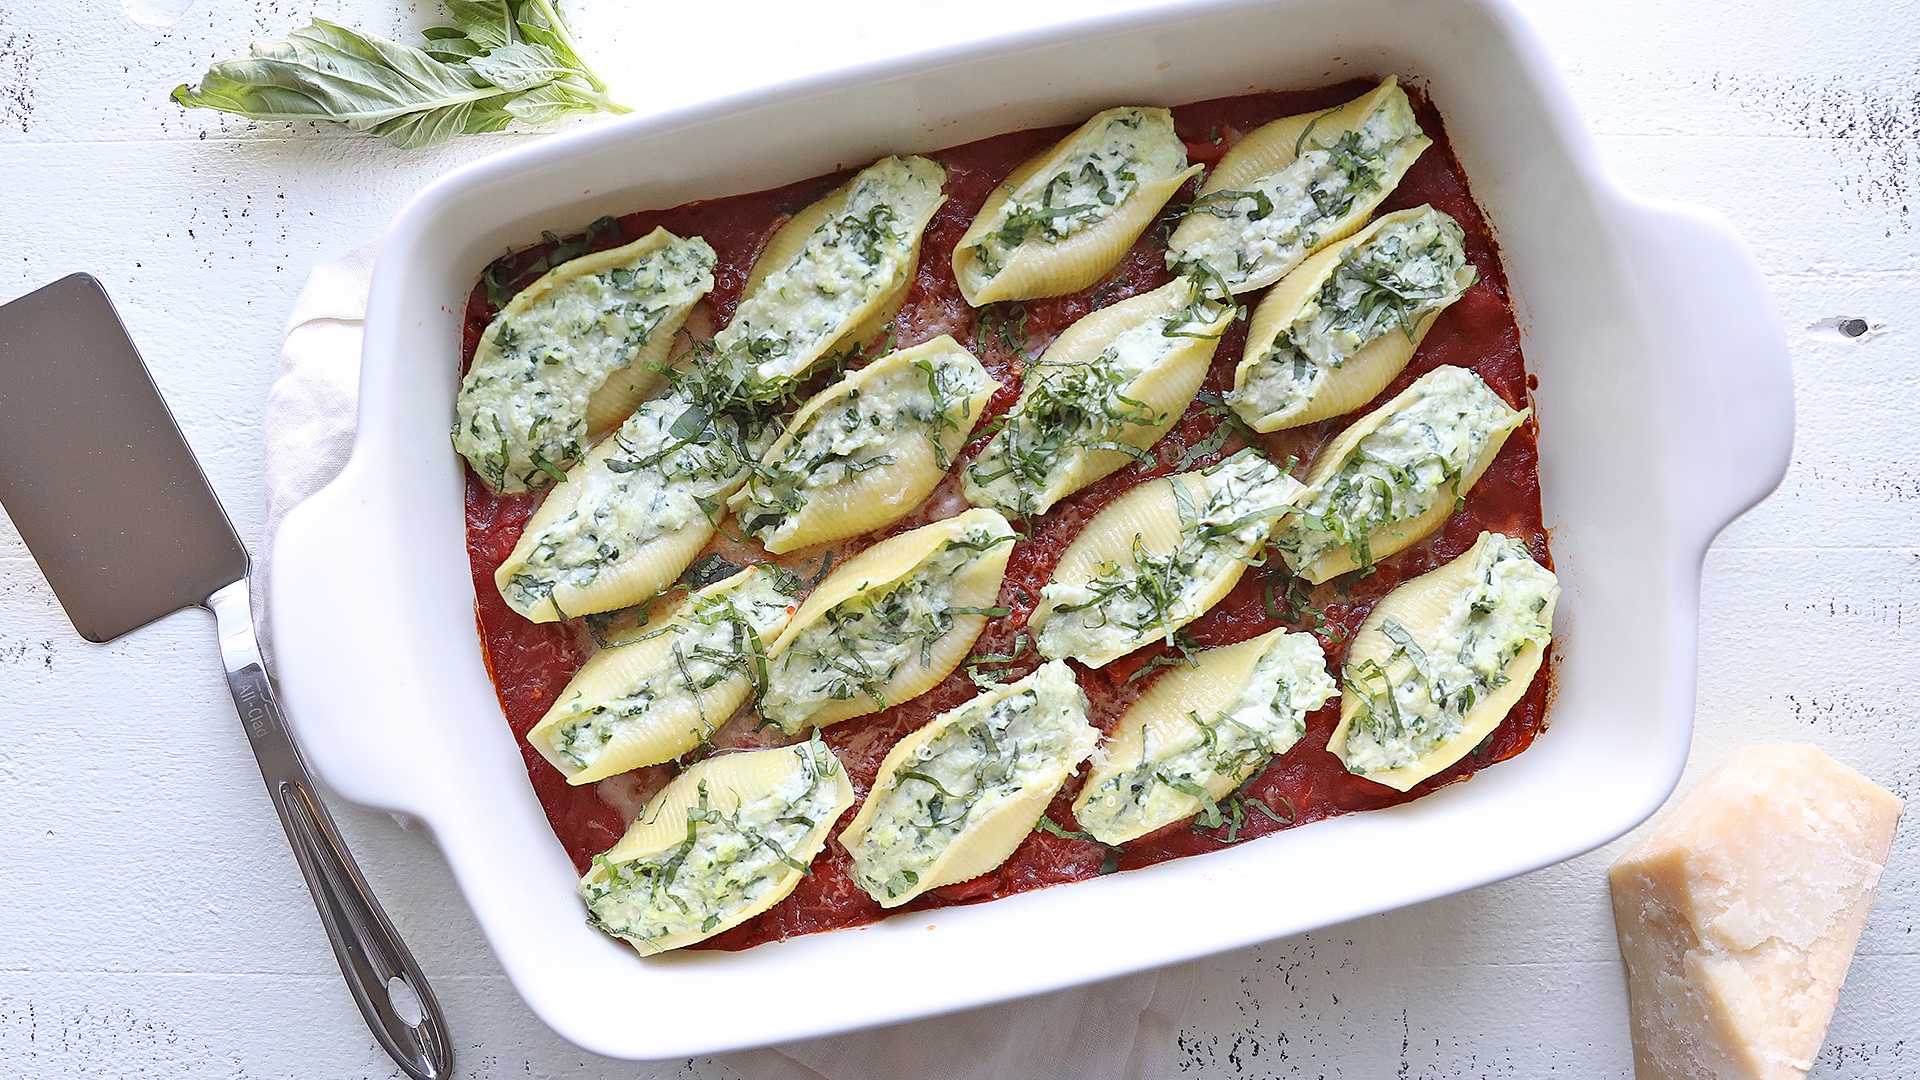 Classic Spinach & Ricotta Stuffed Shells Are the Perfect Holiday Pasta Dish